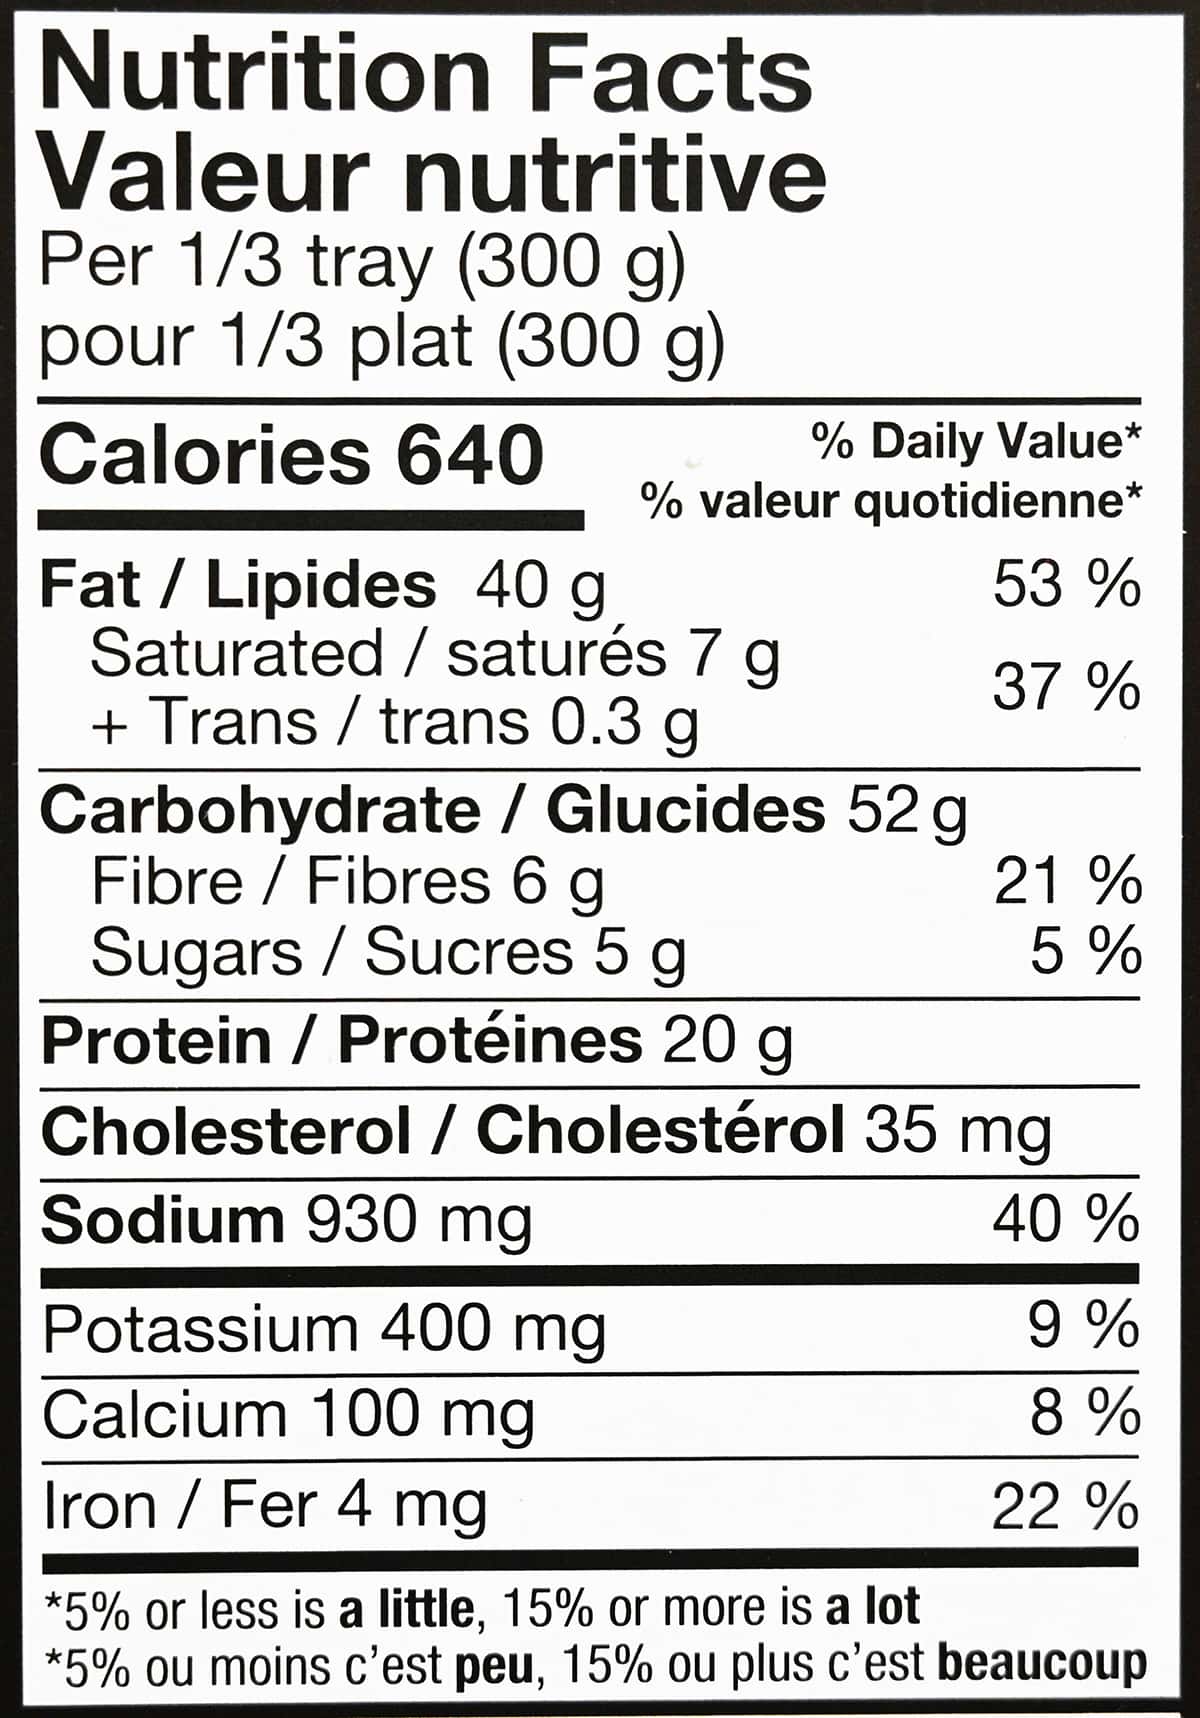 Image of the nutrition facts for the noodles from the package.